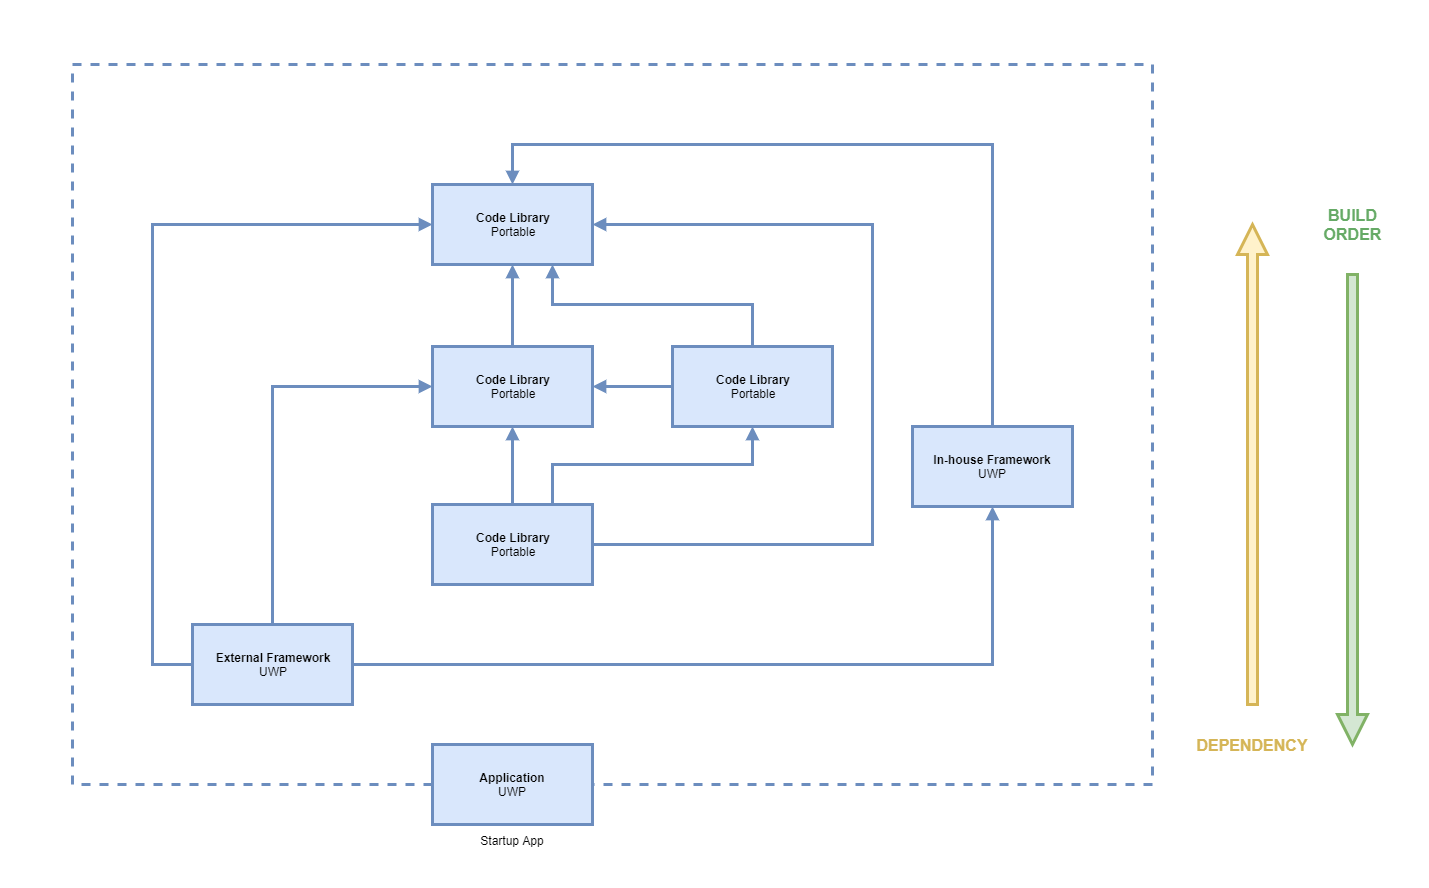 The Project Structure of our Application